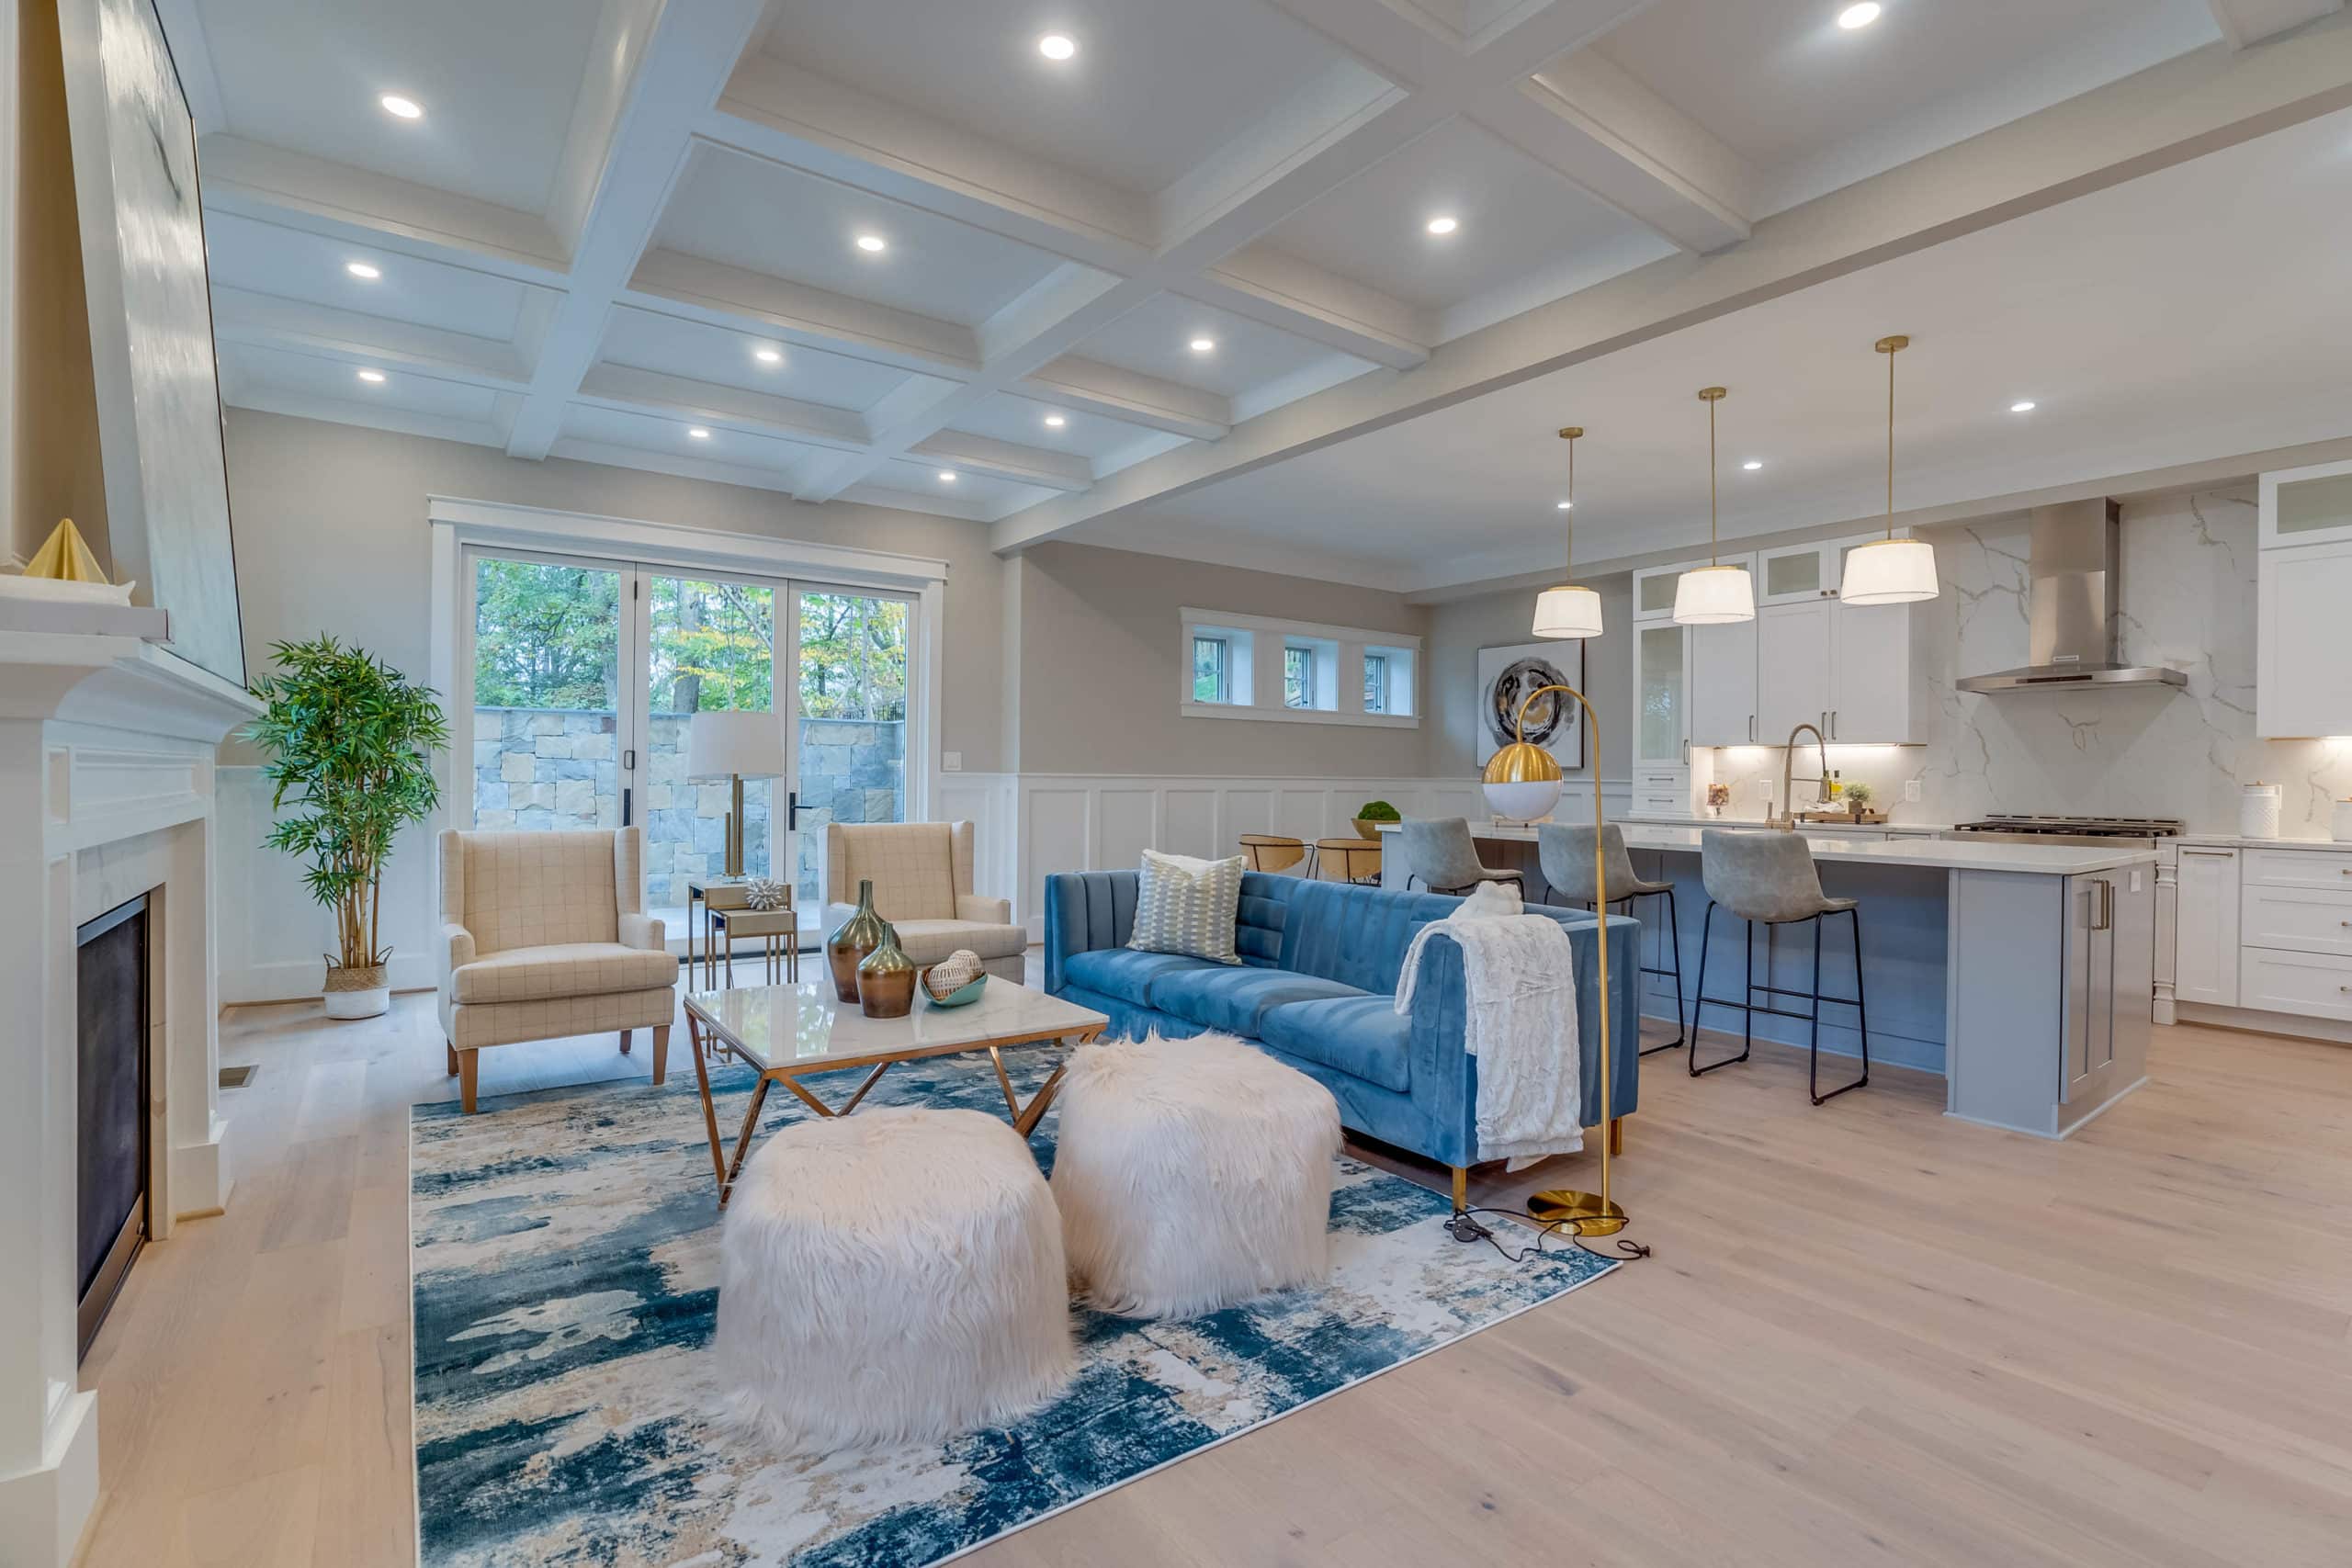 Luxurious living room and kitchen with light oak flooring, white shaker cabinets, white and blue sofa, and high ceiling